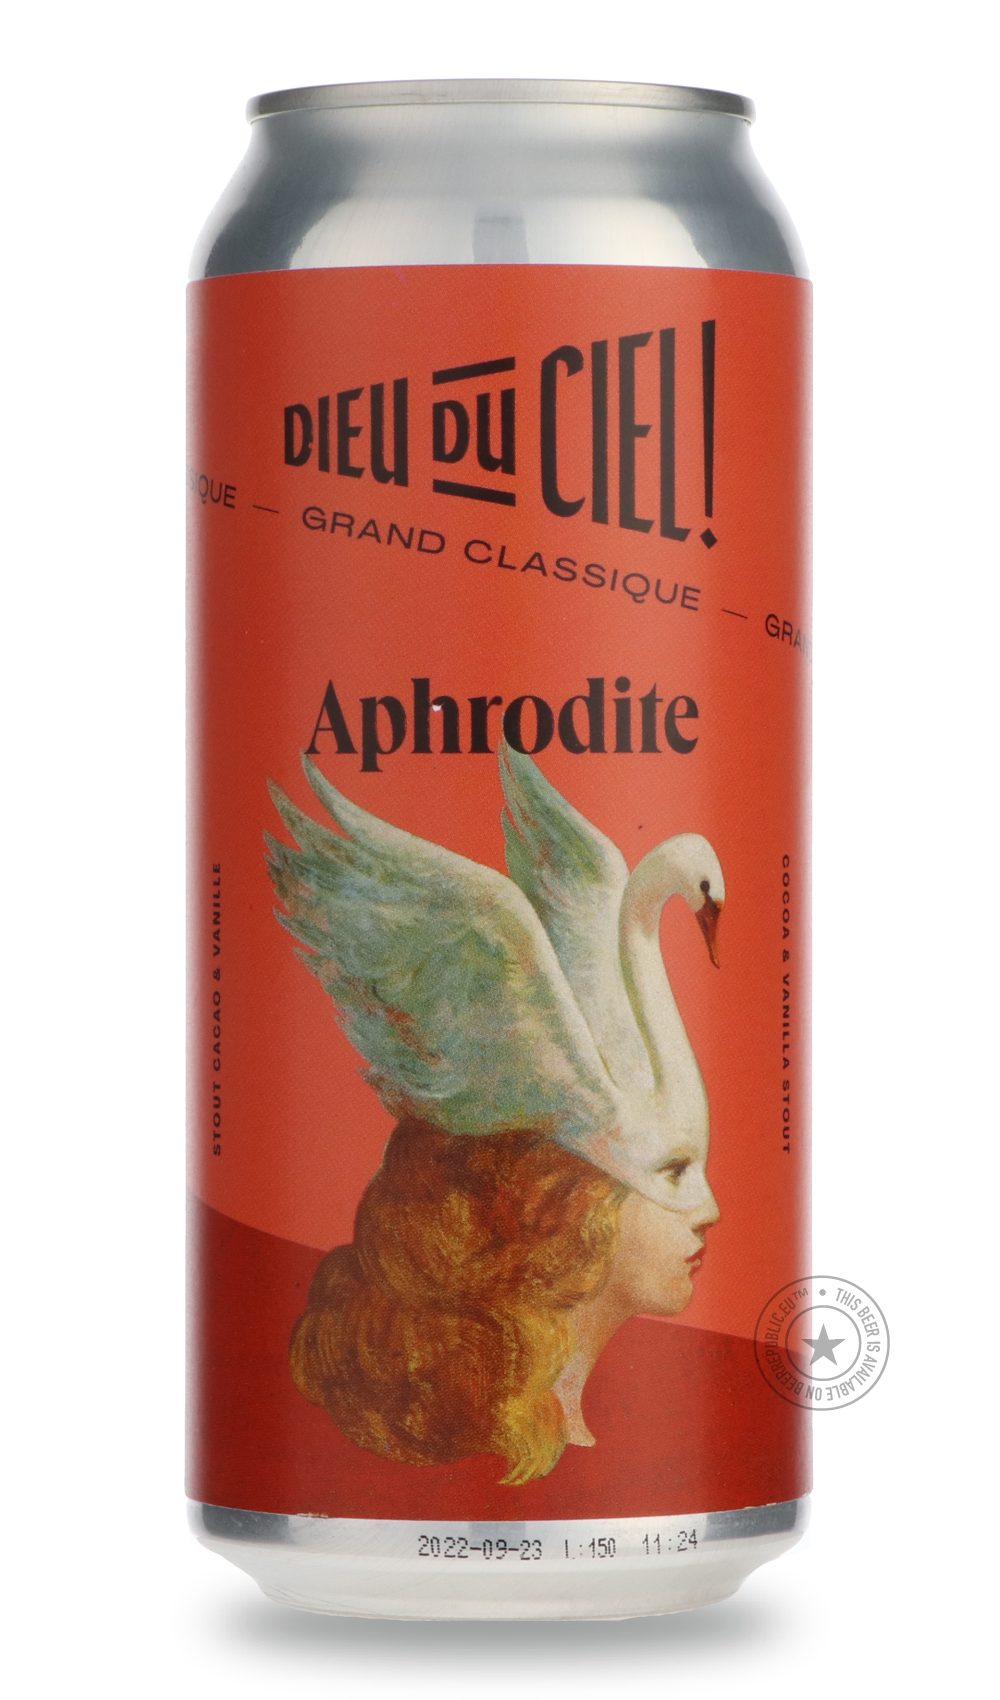 -Dieu du Ciel- Aphrodite-Stout & Porter- Only @ Beer Republic - The best online beer store for American & Canadian craft beer - Buy beer online from the USA and Canada - Bier online kopen - Amerikaans bier kopen - Craft beer store - Craft beer kopen - Amerikanisch bier kaufen - Bier online kaufen - Acheter biere online - IPA - Stout - Porter - New England IPA - Hazy IPA - Imperial Stout - Barrel Aged - Barrel Aged Imperial Stout - Brown - Dark beer - Blond - Blonde - Pilsner - Lager - Wheat - Weizen - Amber